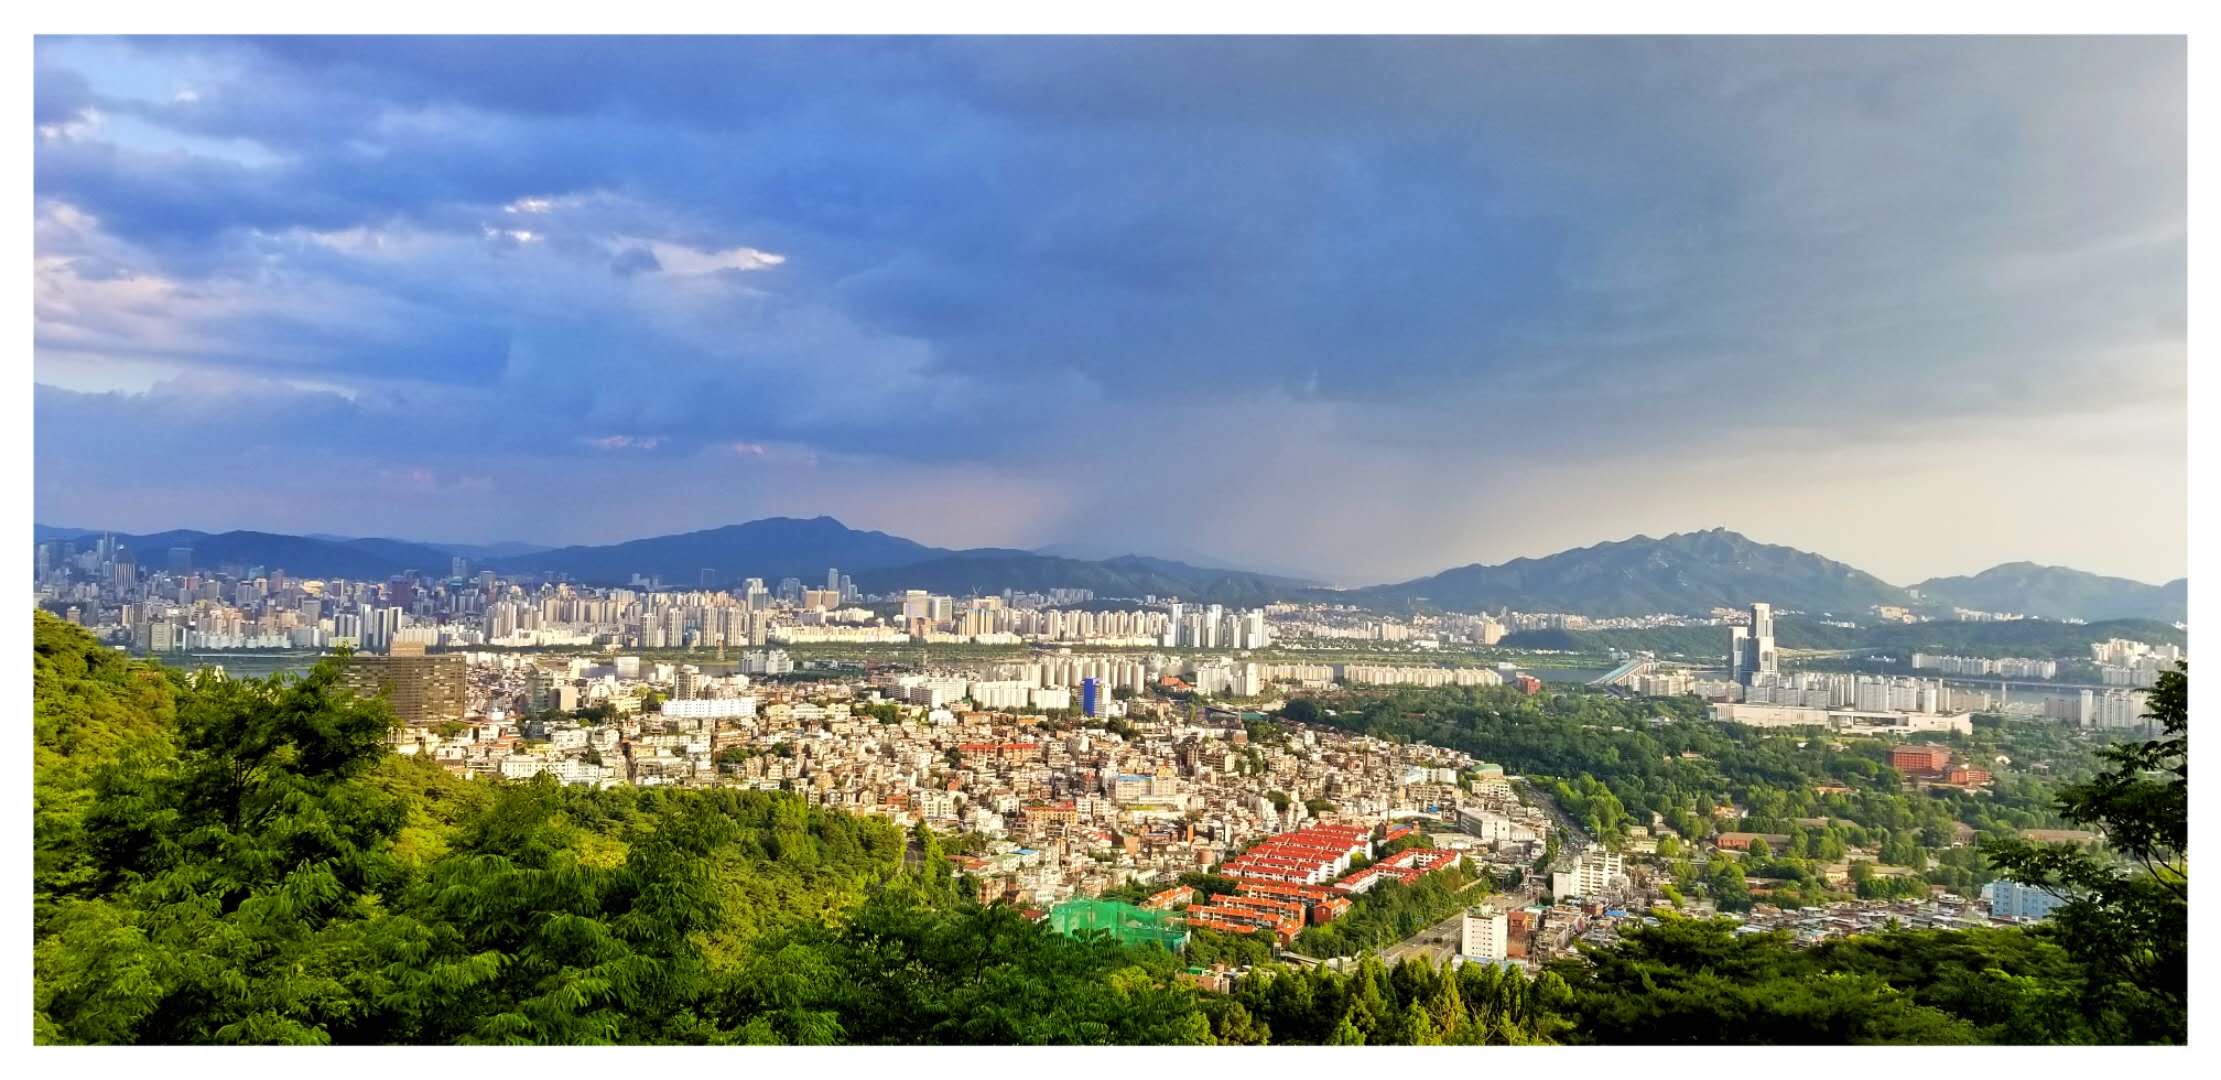 The view of Seoul from Seoul Tower